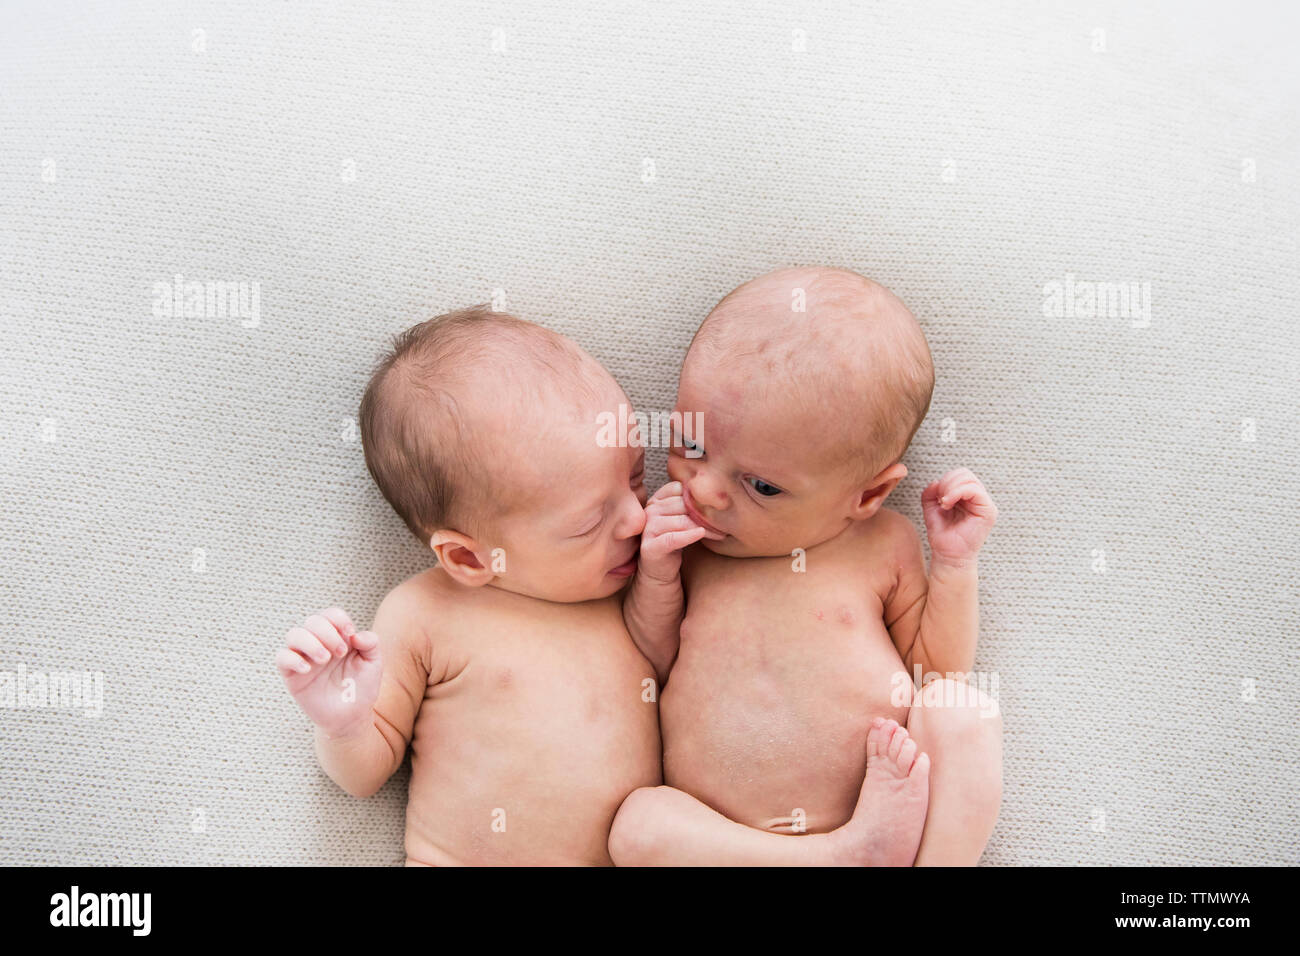 Fraternal Newborn Twins on a Off-White Blanket, Chewing Their Hands Stock Photo